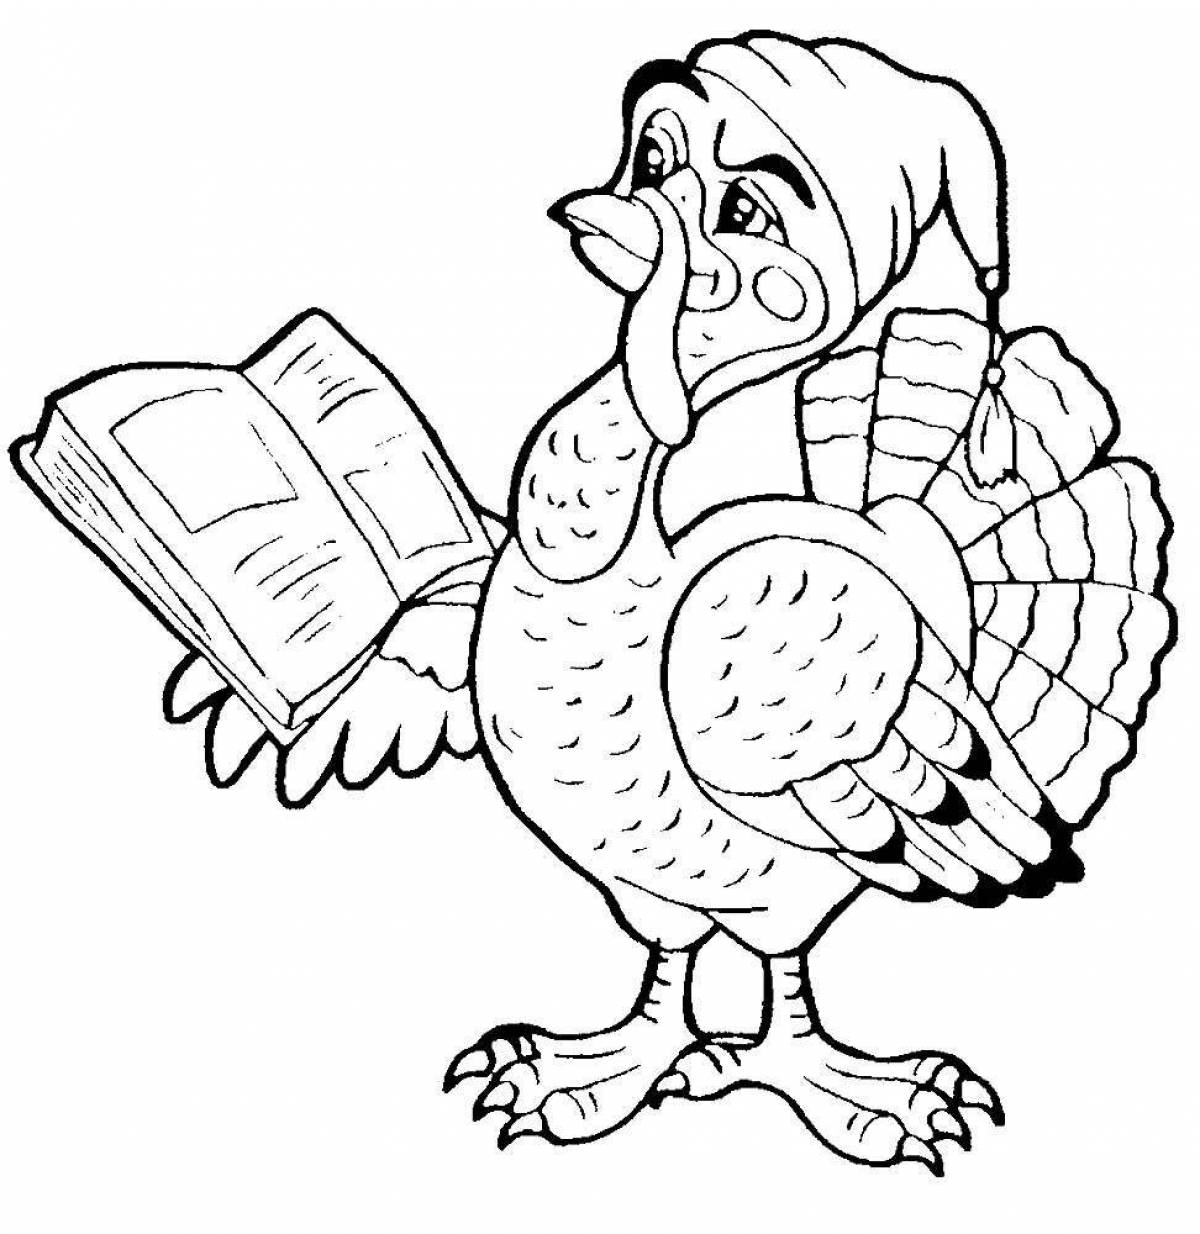 Colorful turkey coloring book for kids